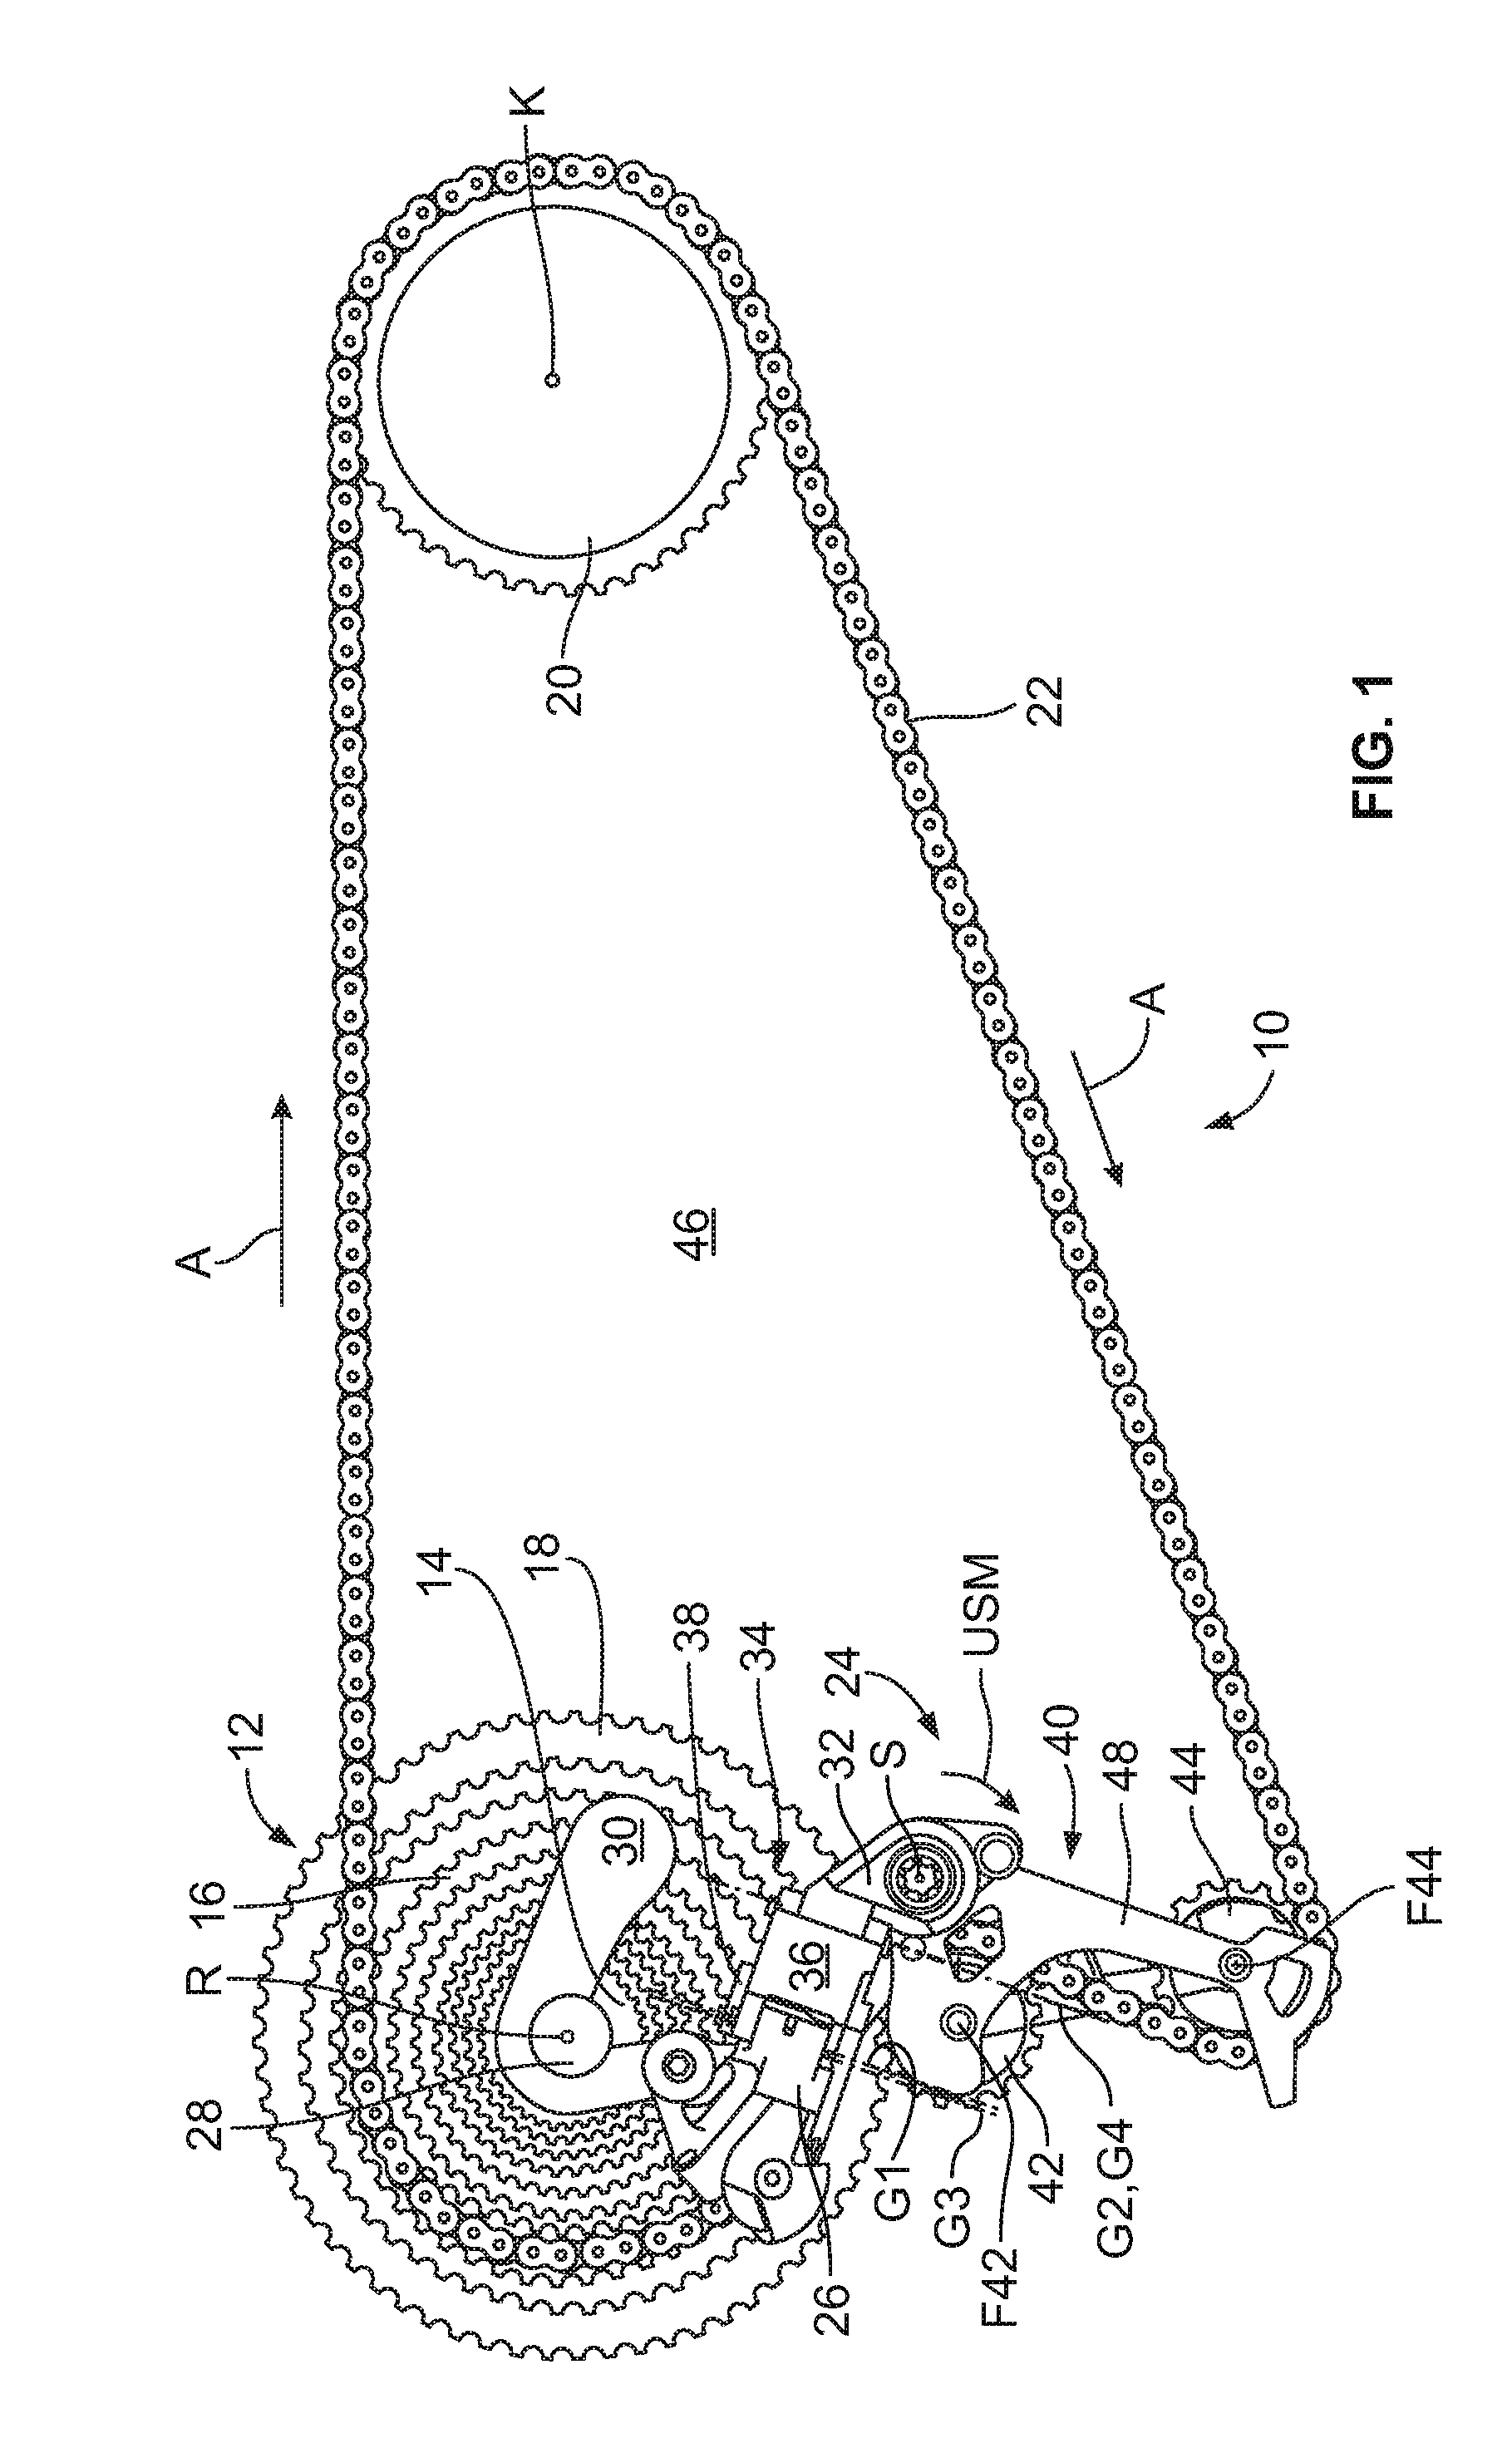 Drive arrangement for a bicycle, having a greater difference in the number of teeth between the largest and the smallest rear chain sprocket